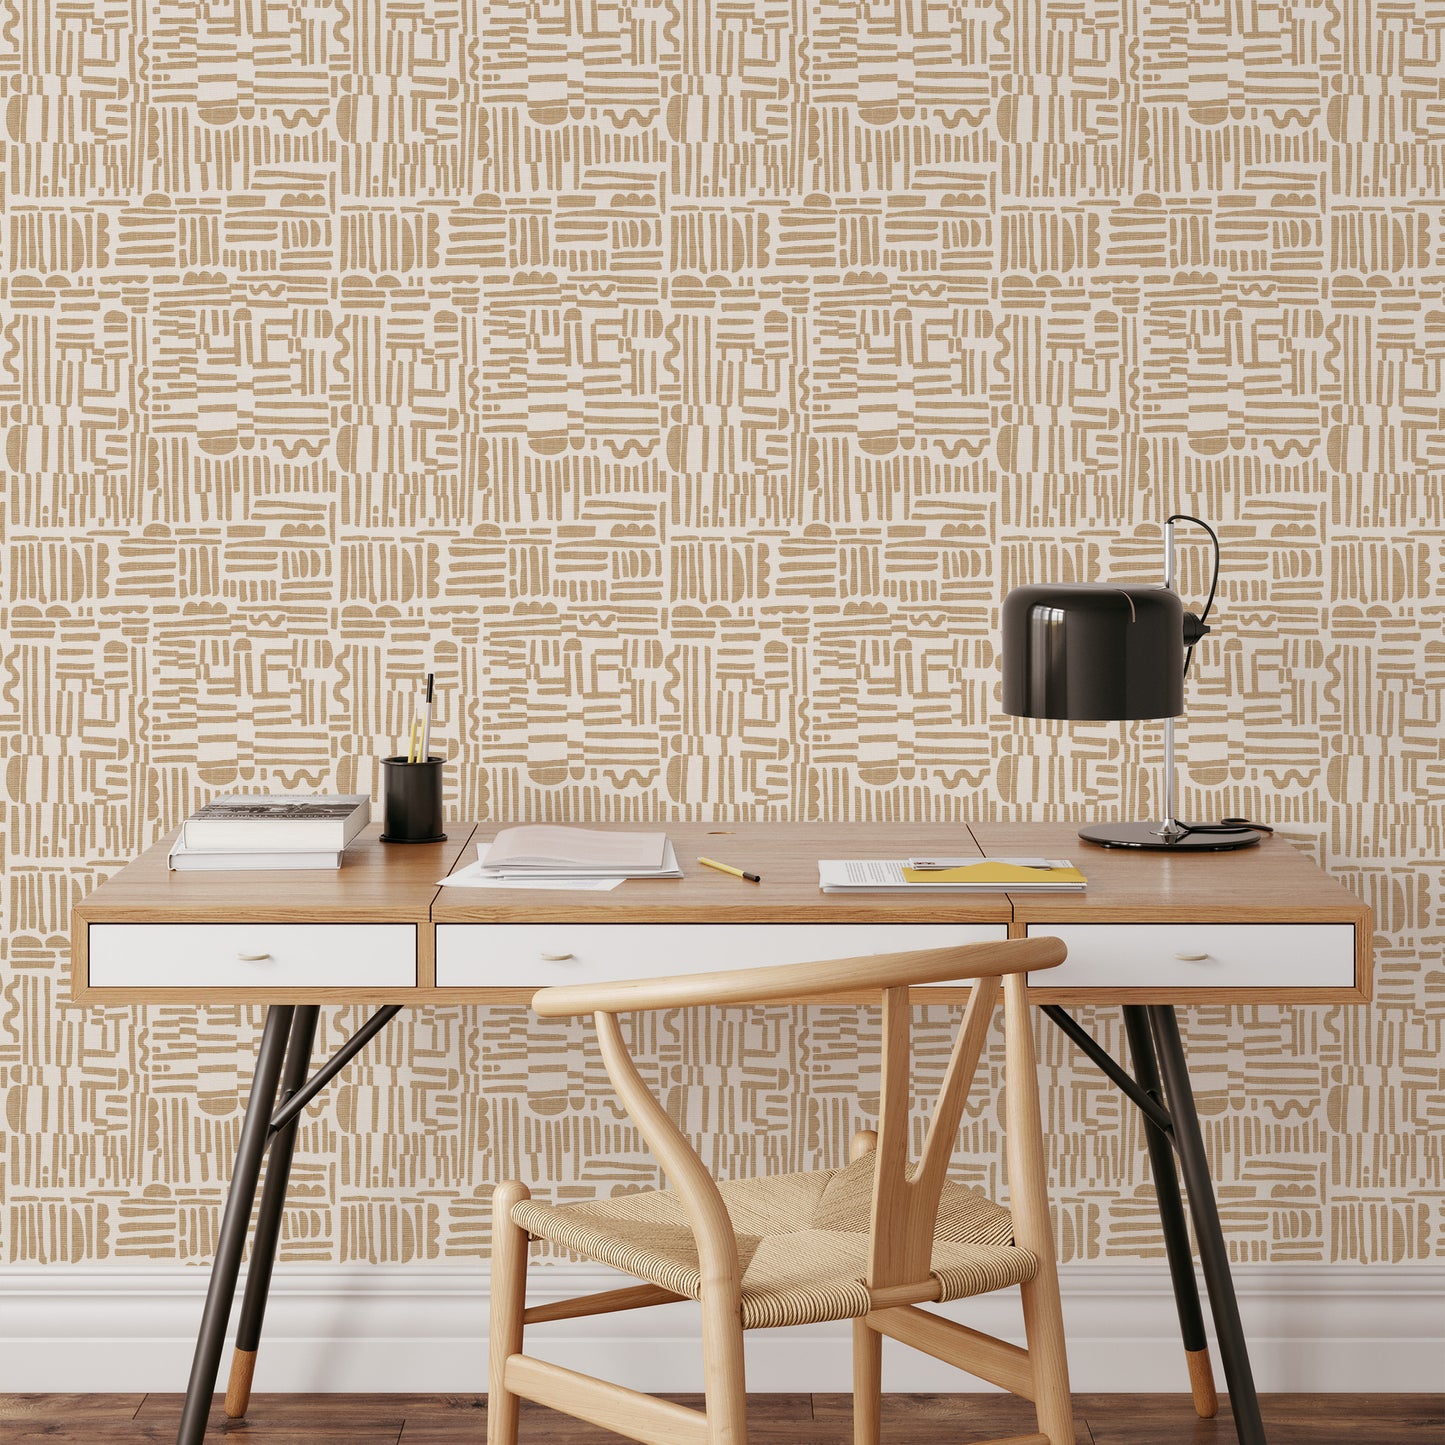 Introducing the statement wallpaper of your dreams, Geometric Lines Wallpaper - Beige on Cream. Feel the avant-garde artistry of this exclusive design as its funky lines add a delightful flair to your walls.